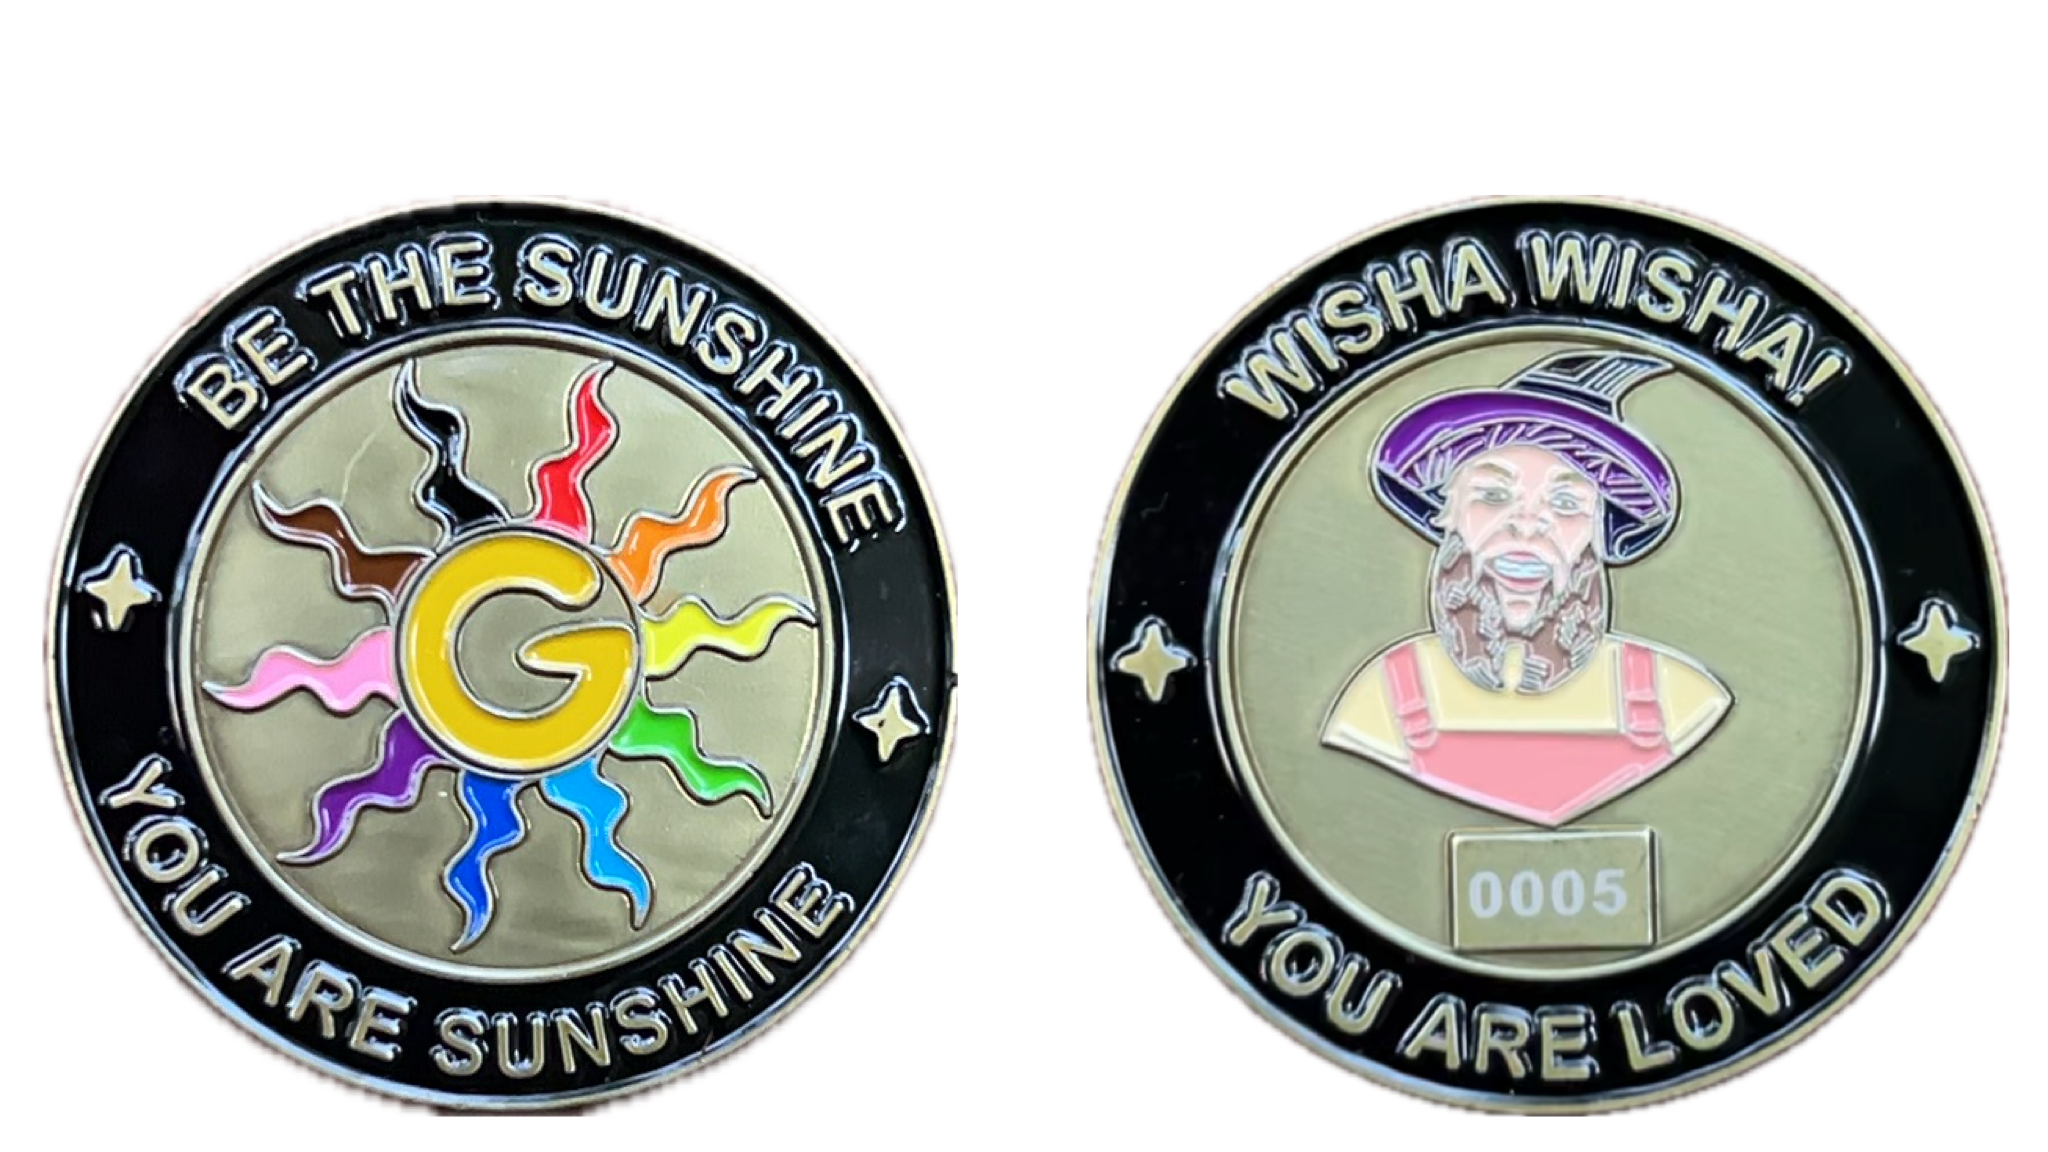 A photograph of the front and back of the metal wizard coin with soft enamel plating. 

This circular wizard coin has a recessed black ring around the edge with an antique gold colored thin line on either side of the black filled in ring. Inside the black ring on the top in arched gold colored text  are the words: 'BE THE SUNSHINE'. In the inner circle of this side of the coin is an uppercase letter G that is yellow like the sun. The sunny G has 10 brigthly colored squiggly sun rays around it. The squiggly sun ray colors include red, orange, yellow, green, blue, indigo, violet, pink, brown and black with a slightly embossed golden outline around it. There are also two gold sparkles in the recessed black ring that circles this side of the coin. They are positioned in the horizontal center of the outer circle in between the arched text on the top and the arched gold colored text on the bottom that reads “YOU ARE SUNSHINE”

The wizard coin is resting on a massive plush tomato that is wrapped like Saturn's rings around a massive plush burger bun. The wizard coin is crafted from soft enamel and has a 3D embossed and recessed type texture. The color of the wizard coin is similar to an antique gold hue. The size of the wizard coin is 1.75 inches in diameter. The coin weighs 1.1 ounces (32 grams)

photograph of WIZARD COIN side A:

In the center of the coin is an illustration of Gilly Shine (they/them). They are wearing a purple wizard hat, a yellow shirt and coral colored overalls. Curved around the top arch of the coin is the incantation 'WISHA WISHA!' and curved along the bottom of the coin is the affirmation: 'YOU ARE SUNSHINE'. Below the illustration is a a slightly raised rectangle box and a unique four digit sequential number is laser engraved inside the box. The number on this coin reads: 0005.

The wizard coin is resting on a massive plush tomato that is wrapped like Saturn's rings around a massive plush burger bun. The wizard coin is crafted from soft enamel and has a 3D embossed and recessed type texture. The color of the wizard coin is similar to an antique gold hue. The size of the wizard coin is 1.75 inches in diameter. The coin weighs 1.1 ounces (32 grams)